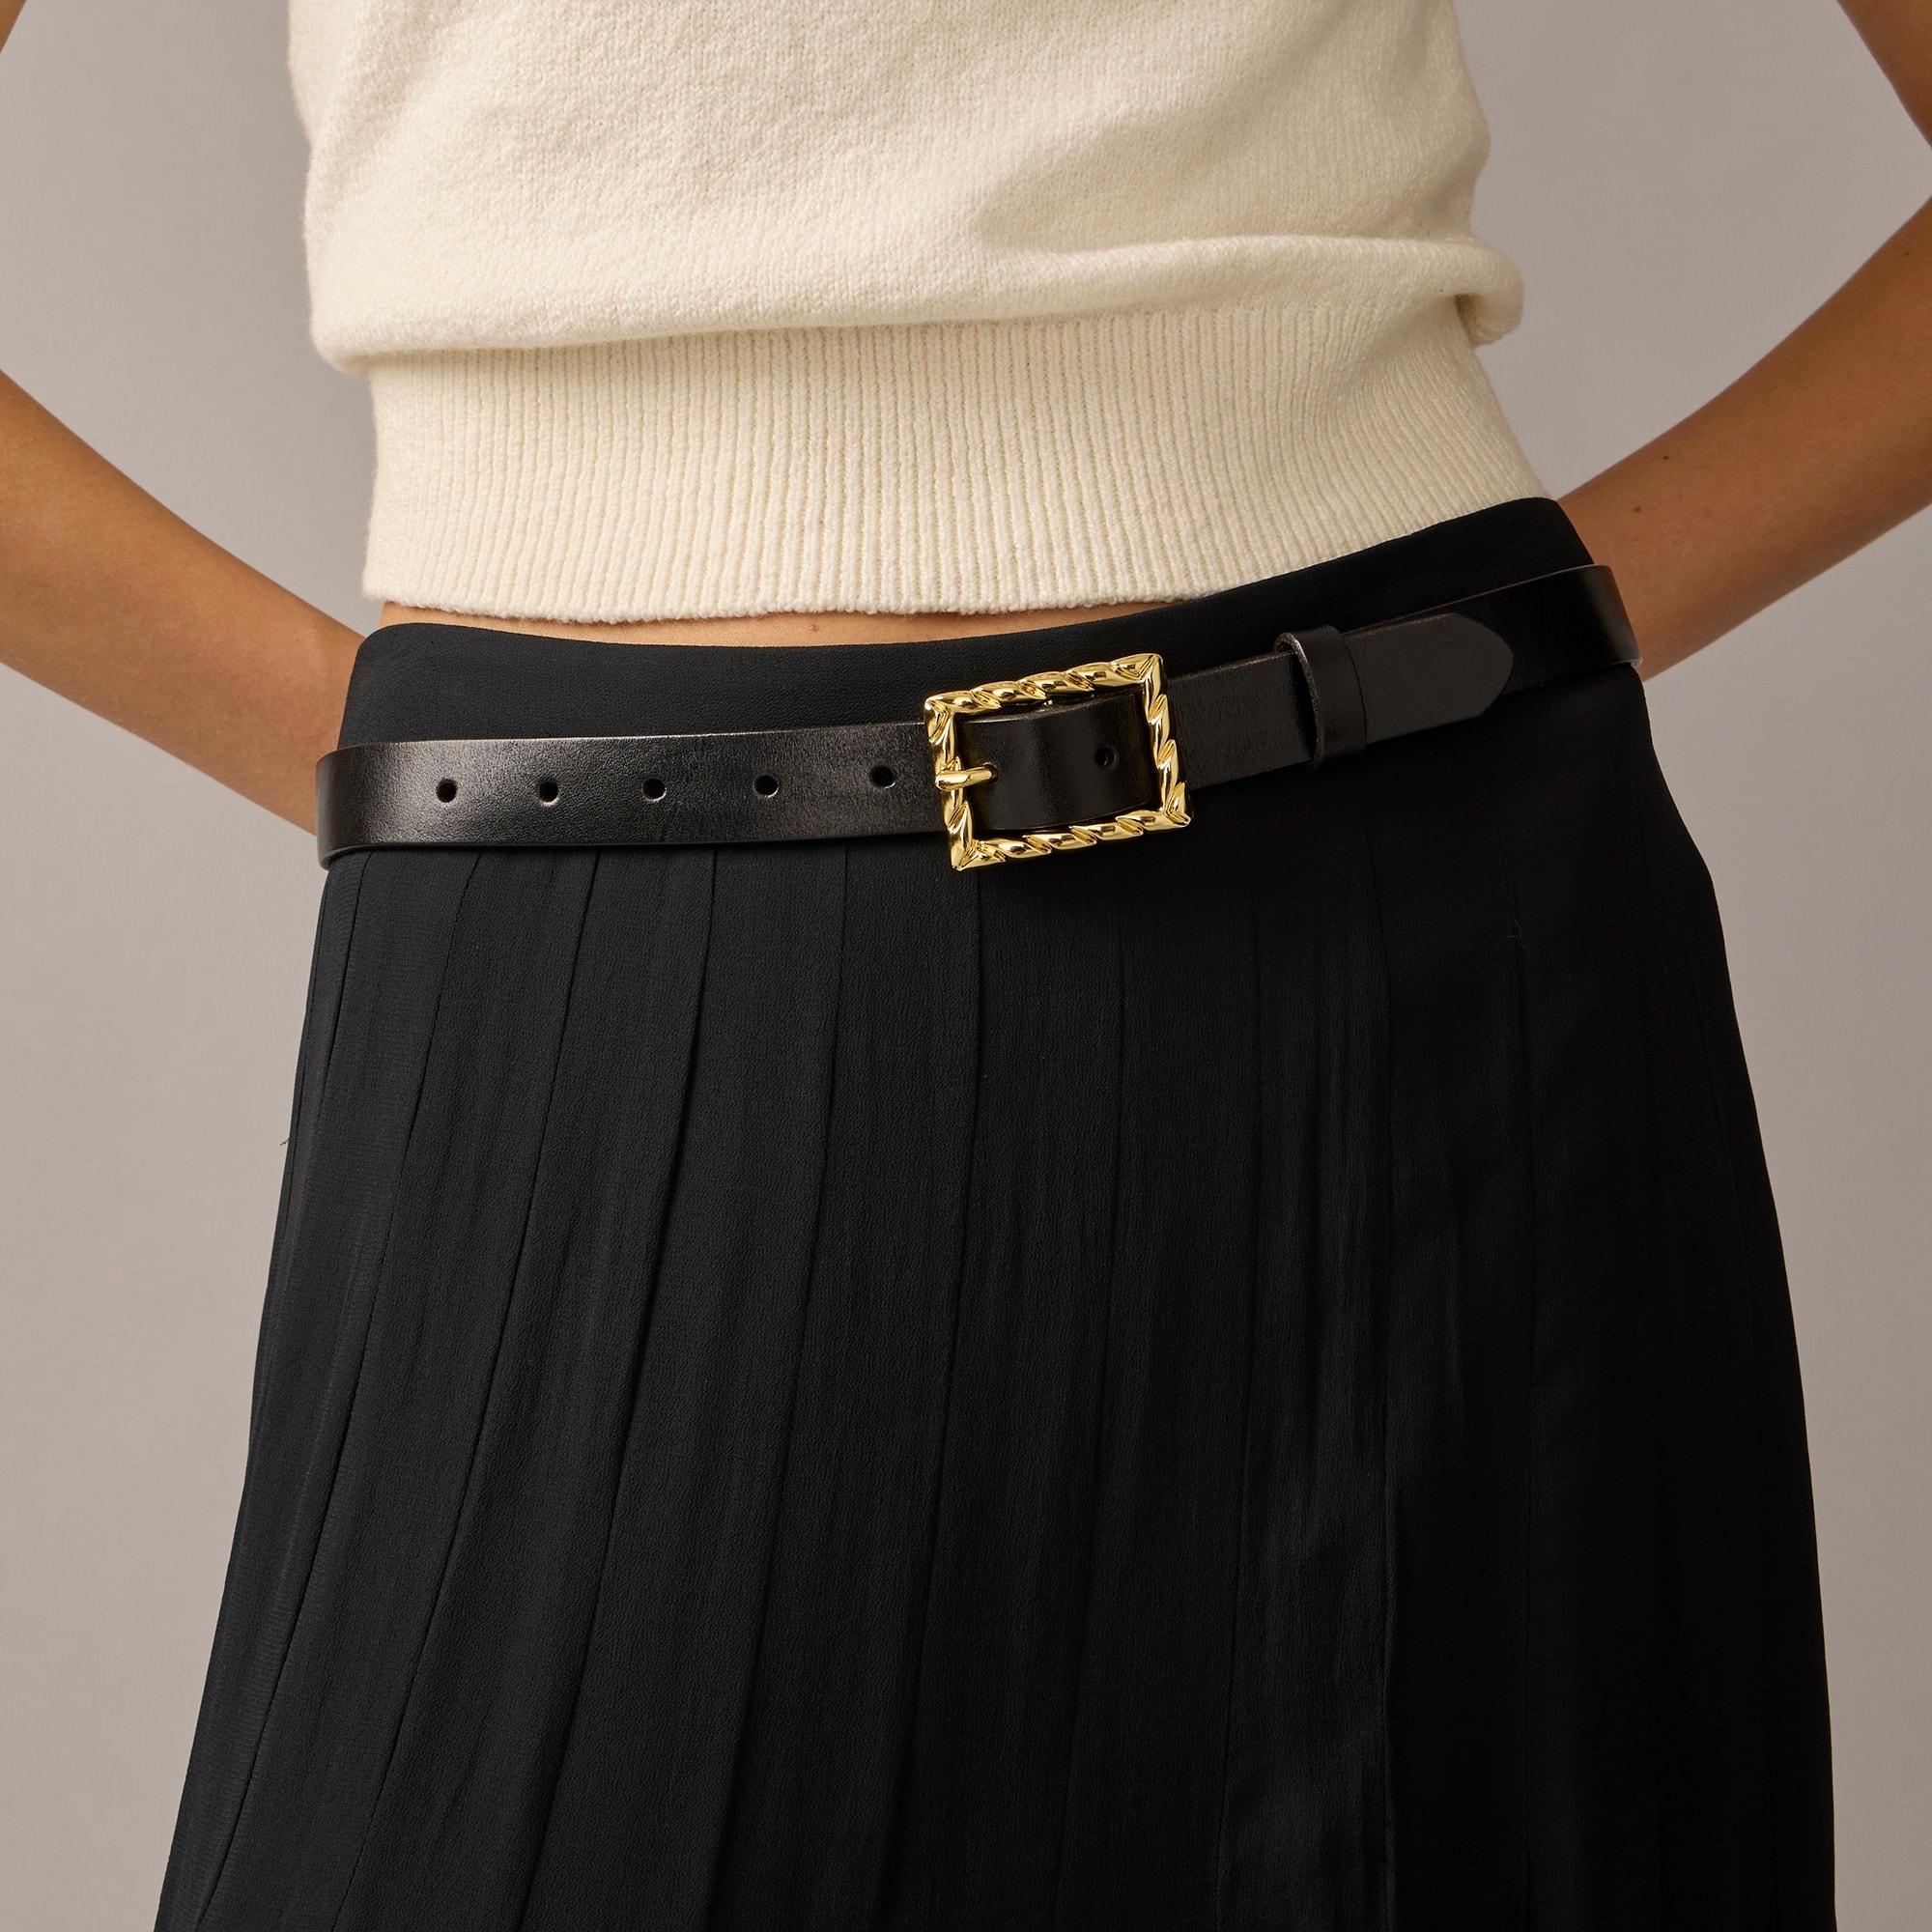 Jcrew Classic Italian leather belt with twisted buckle